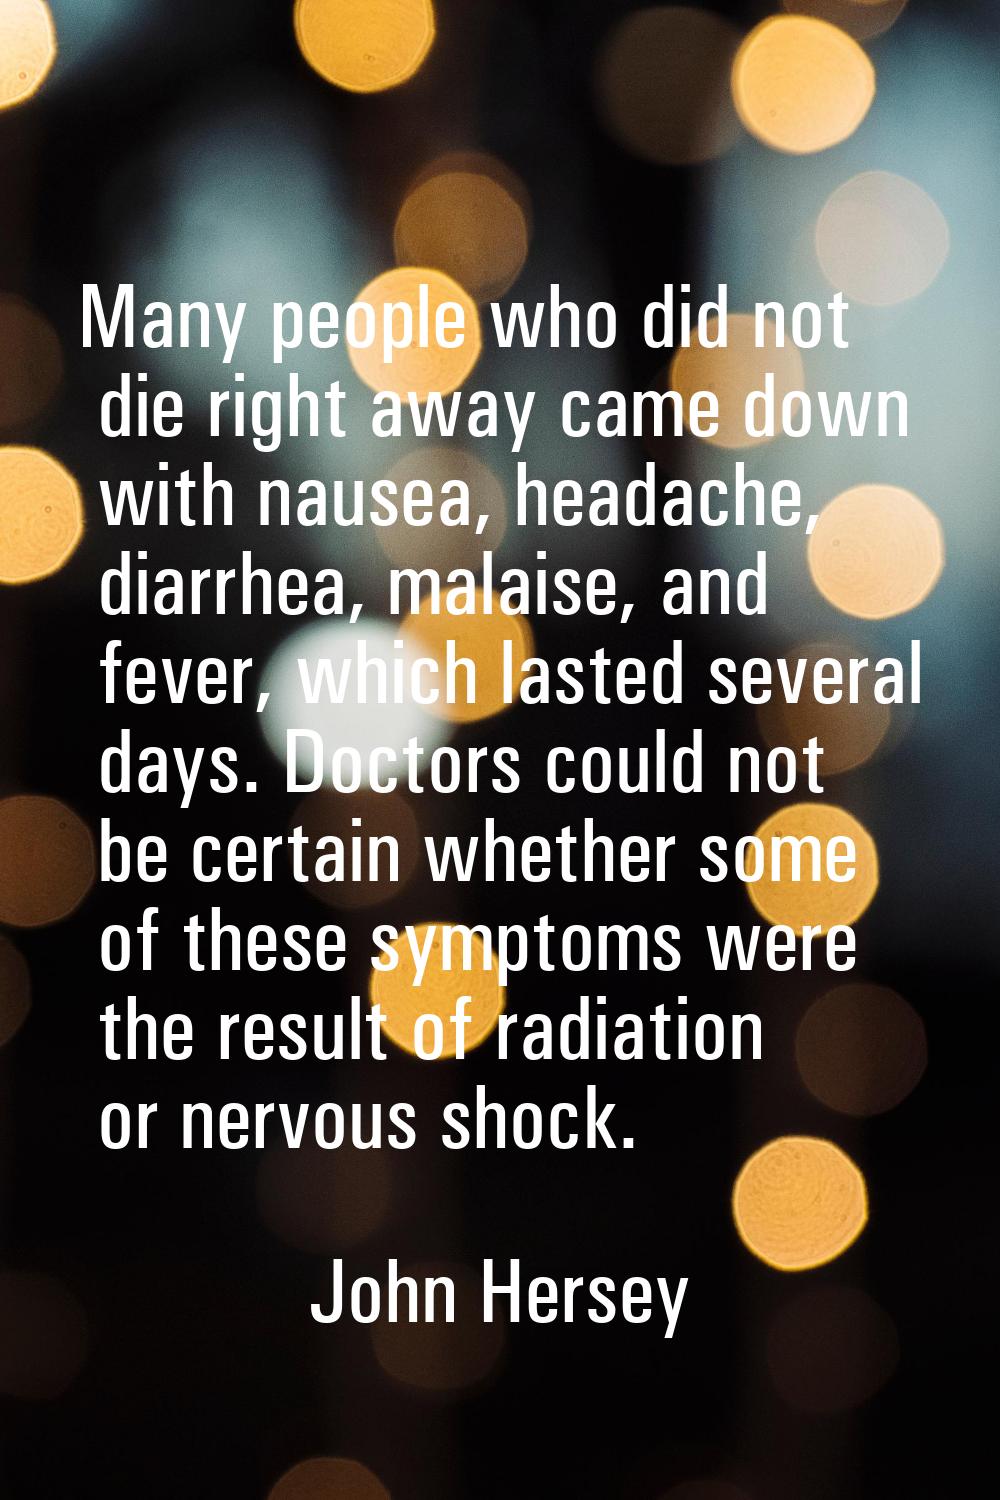 Many people who did not die right away came down with nausea, headache, diarrhea, malaise, and feve